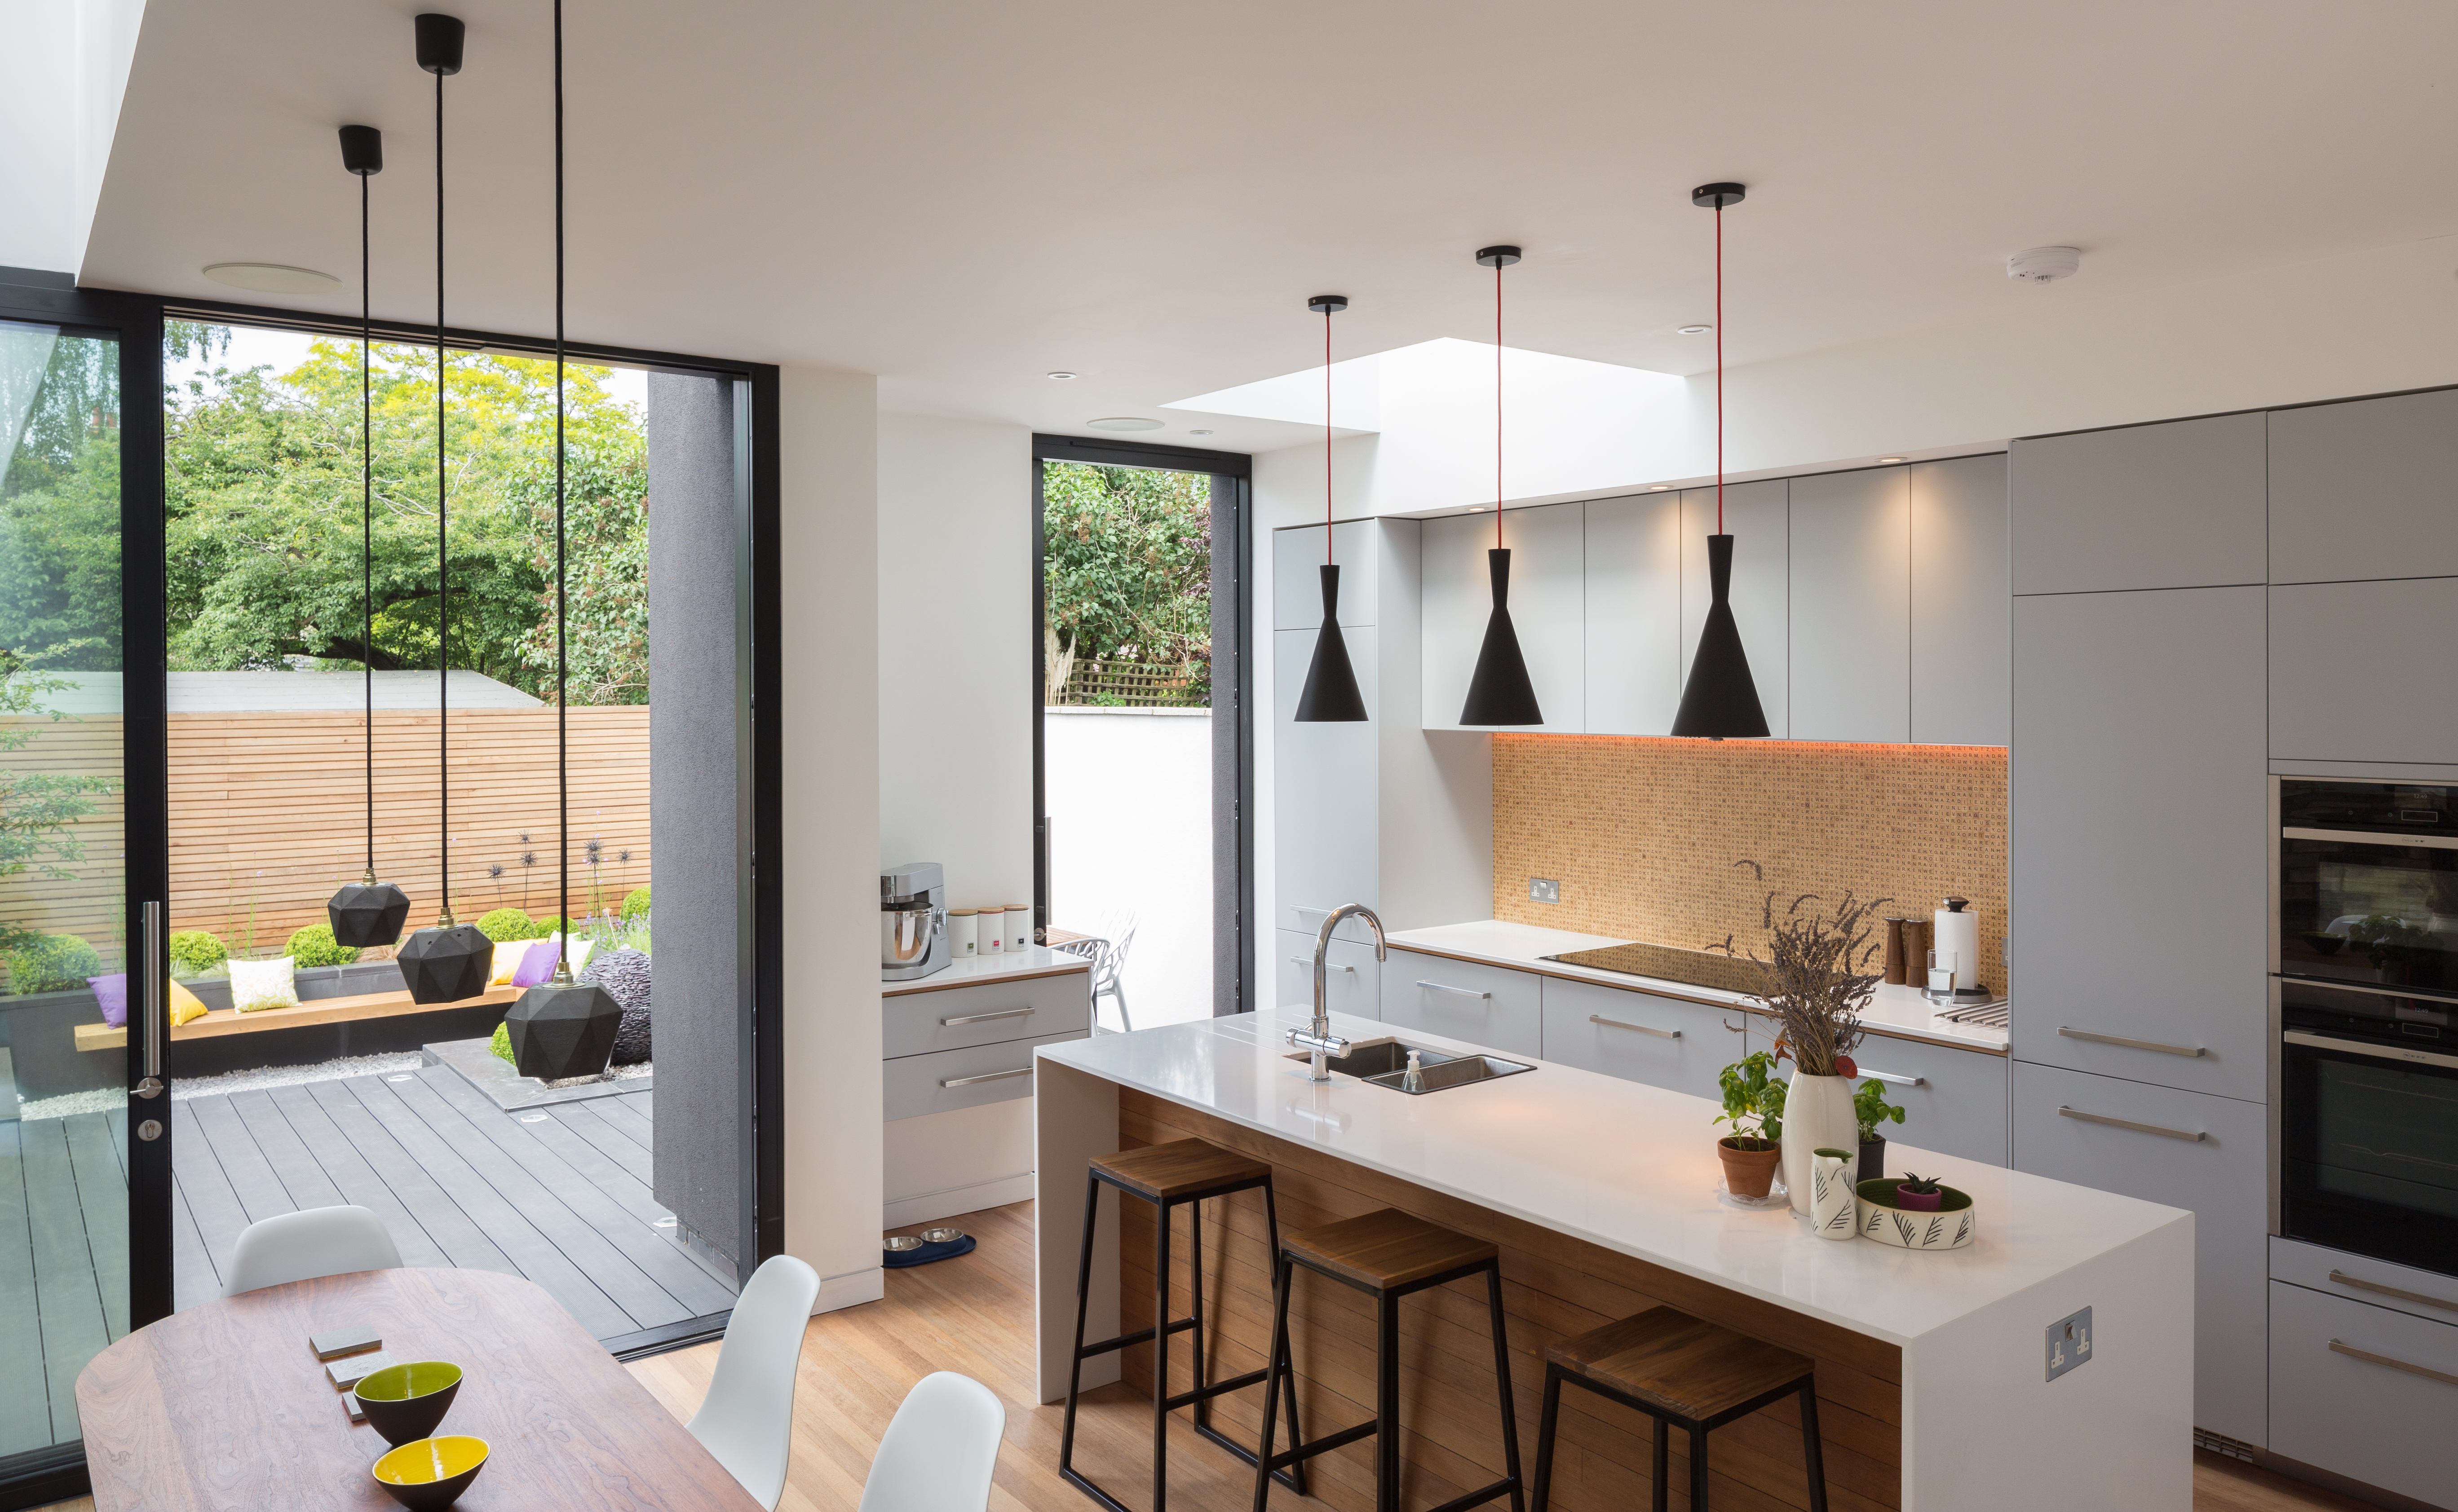 kitchen extension costs: what to budget for a new room in 2022